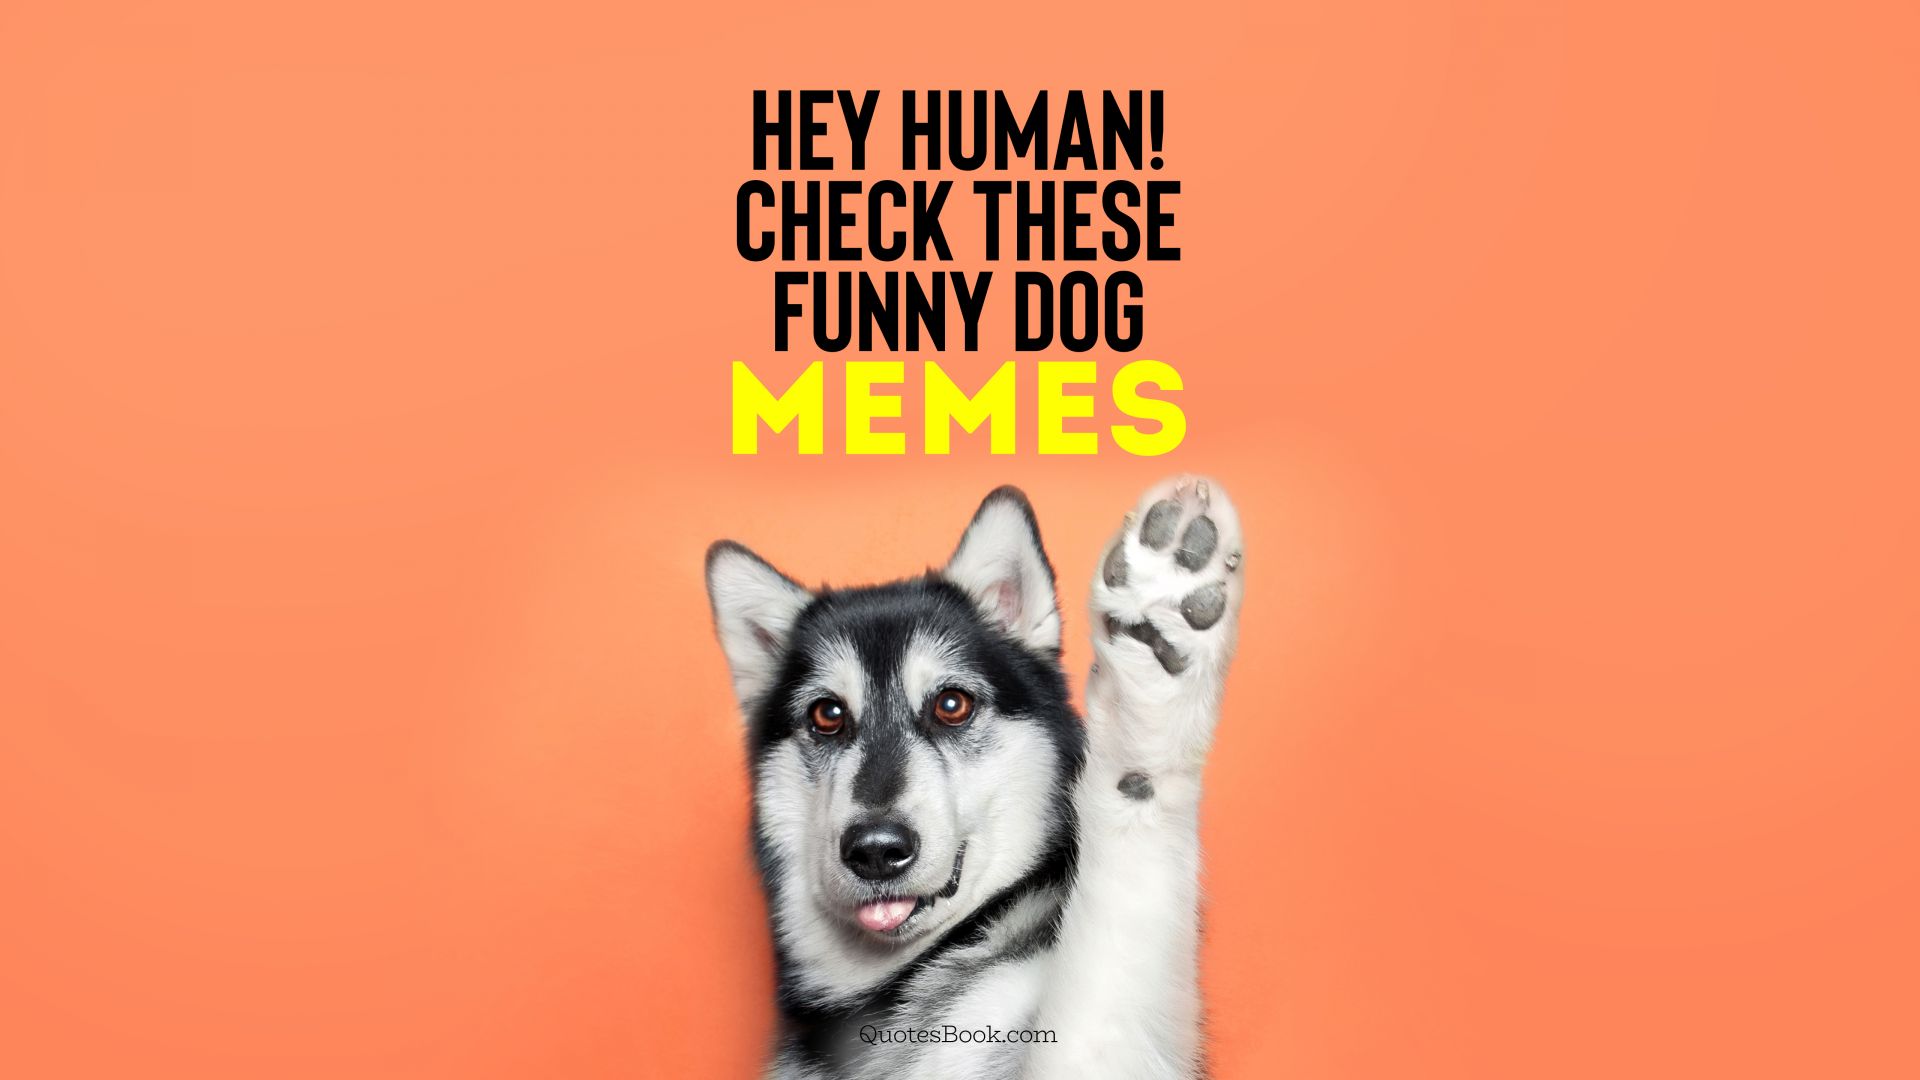 Hey human! Check these funny dog memes